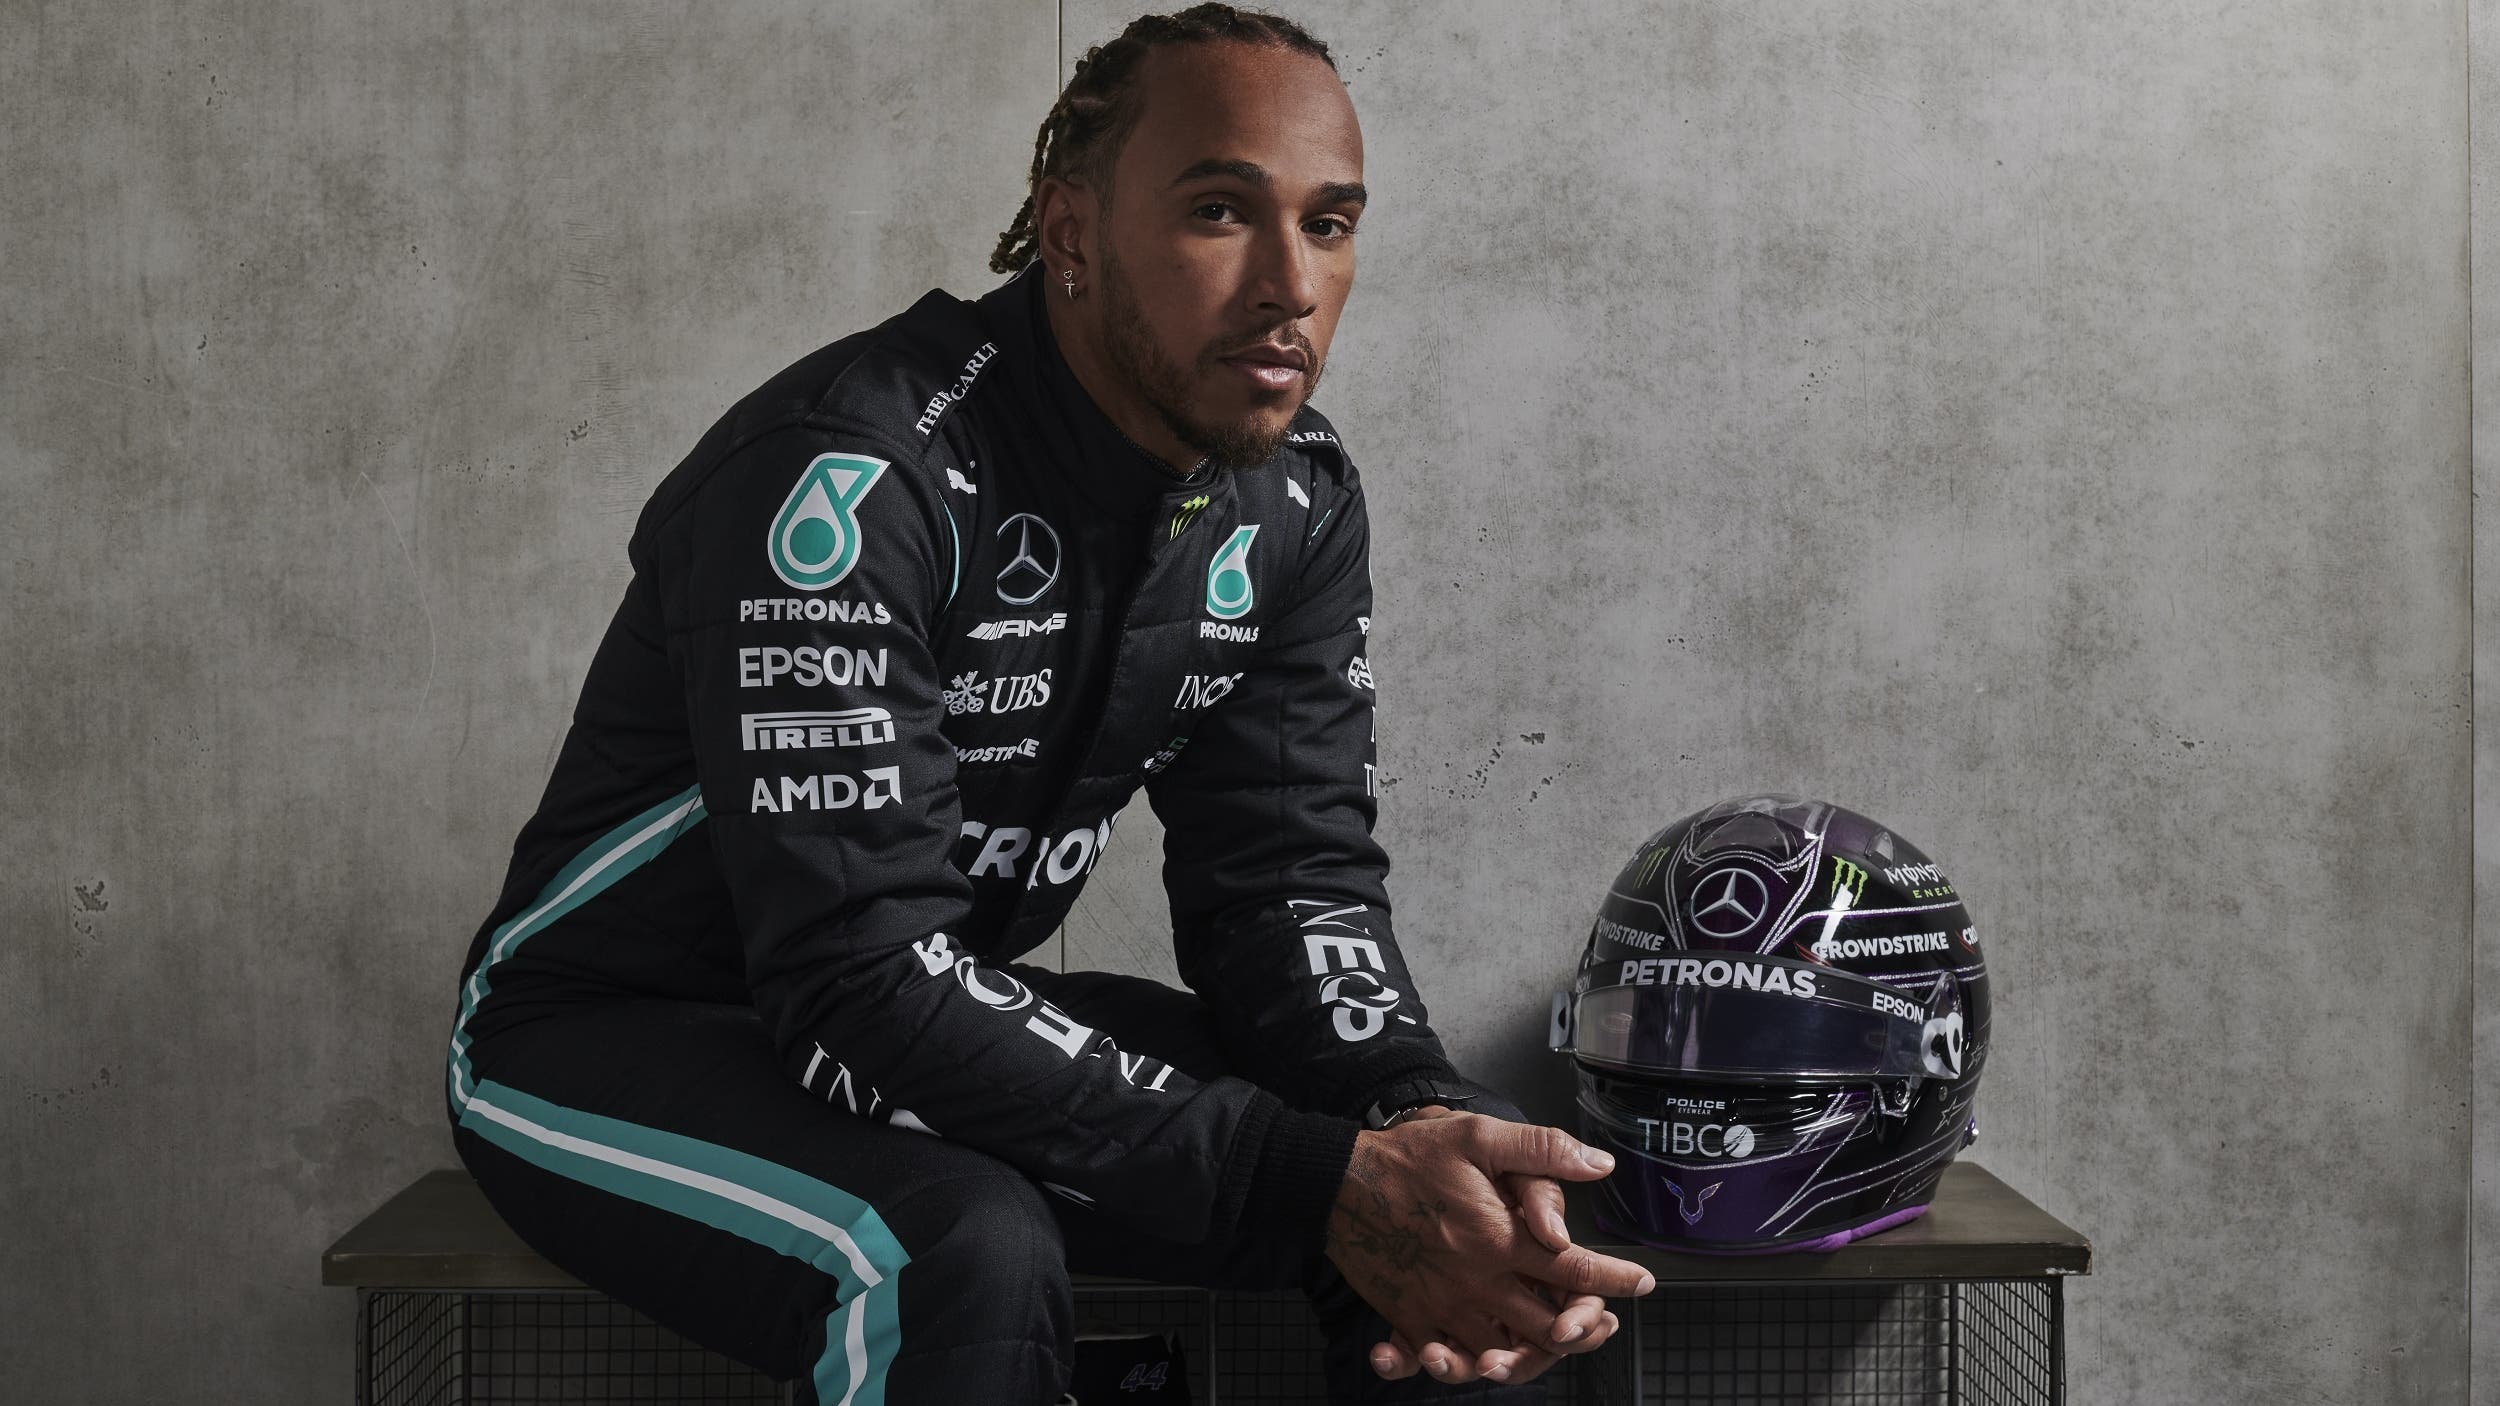 Mercedes unveil car for Lewis Hamilton’s recordbreaking eighth F1